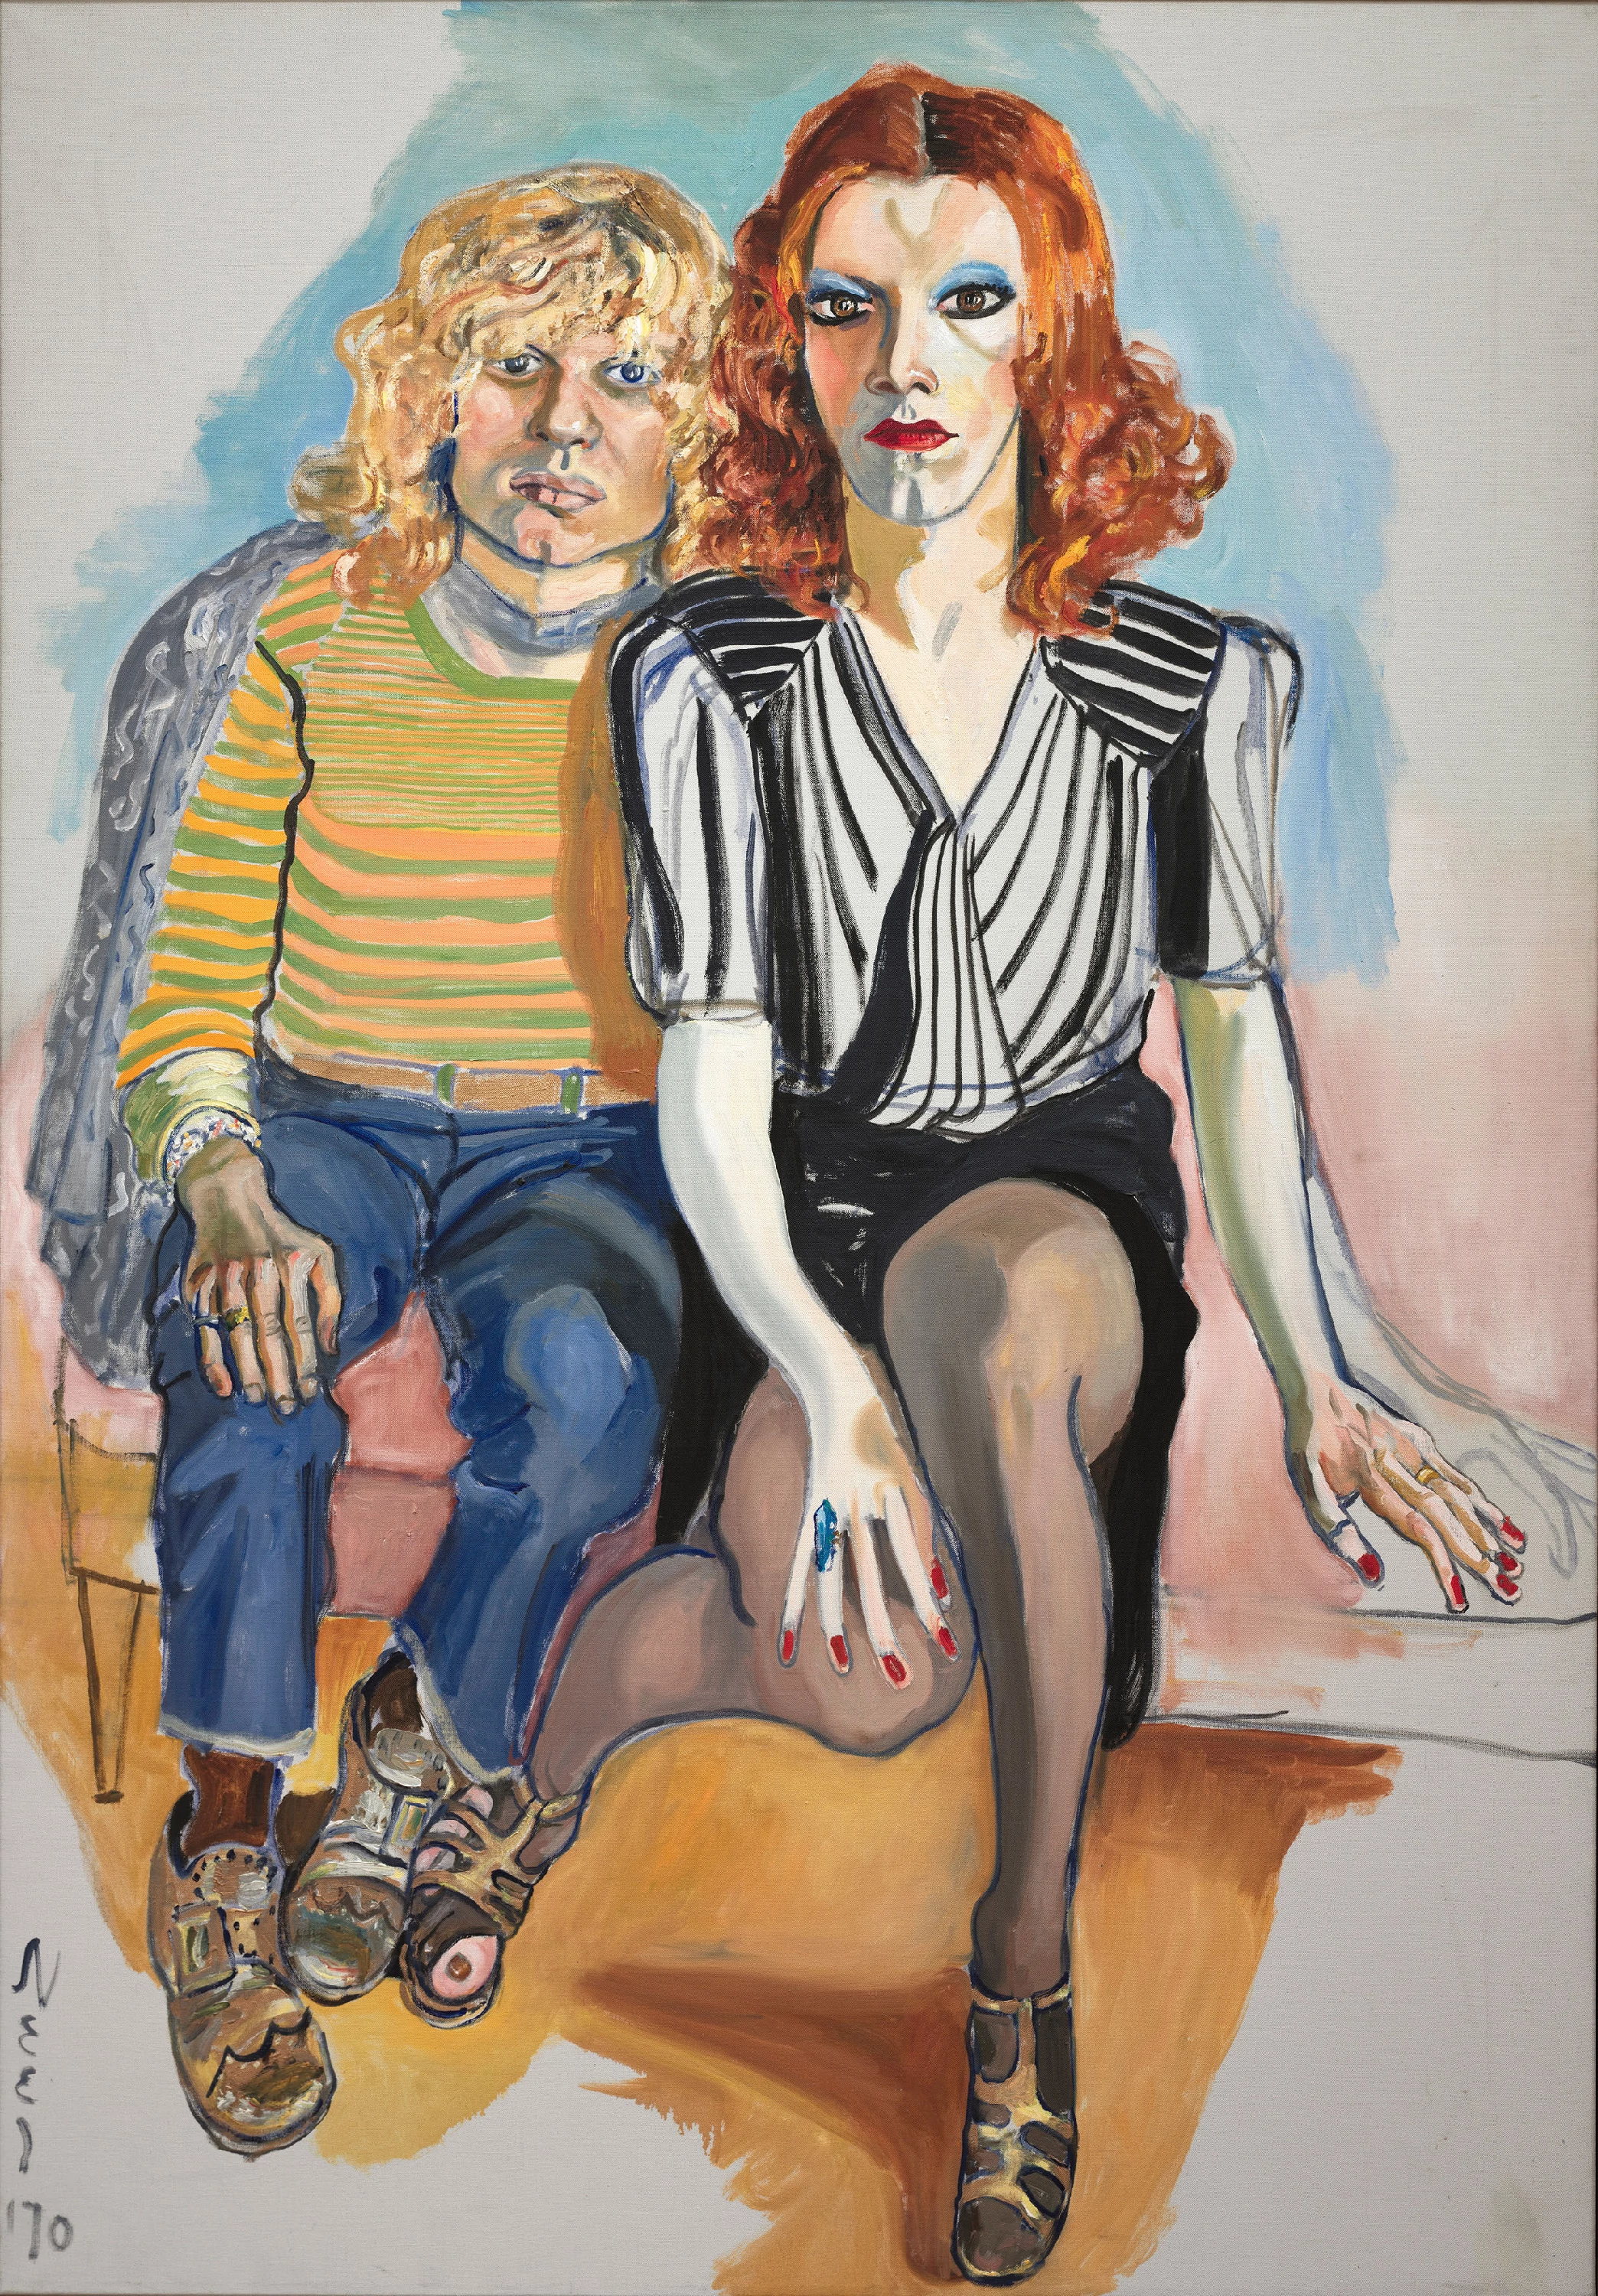 Jackie Curtis and Ritta Redd, Alice Neel